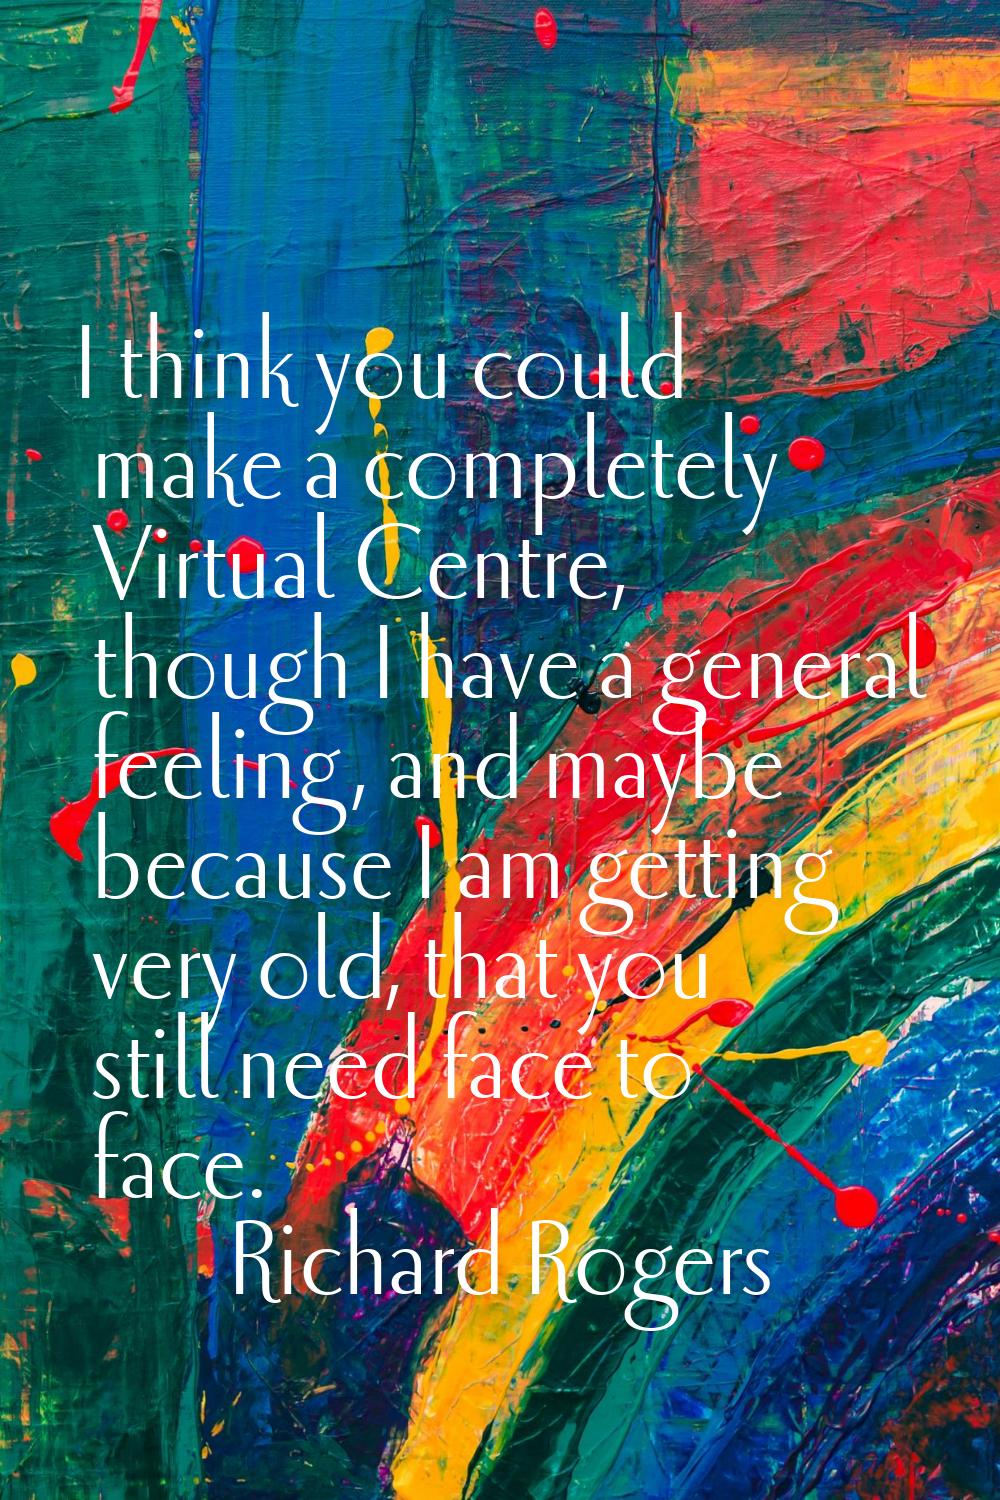 I think you could make a completely Virtual Centre, though I have a general feeling, and maybe beca